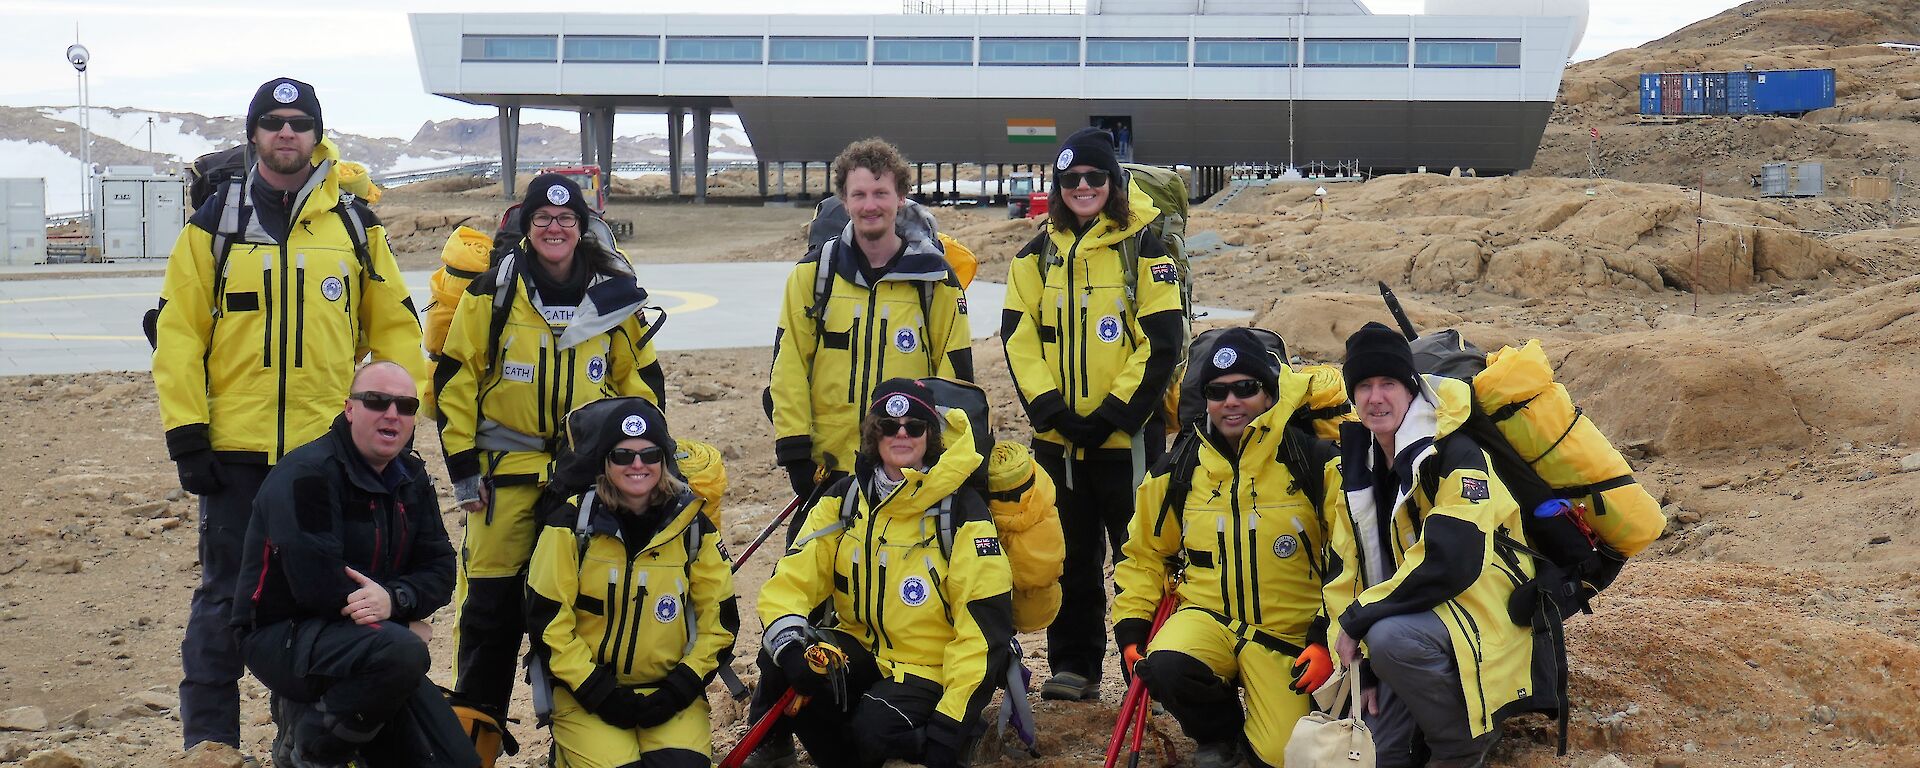 group of expeditioners in front of station building